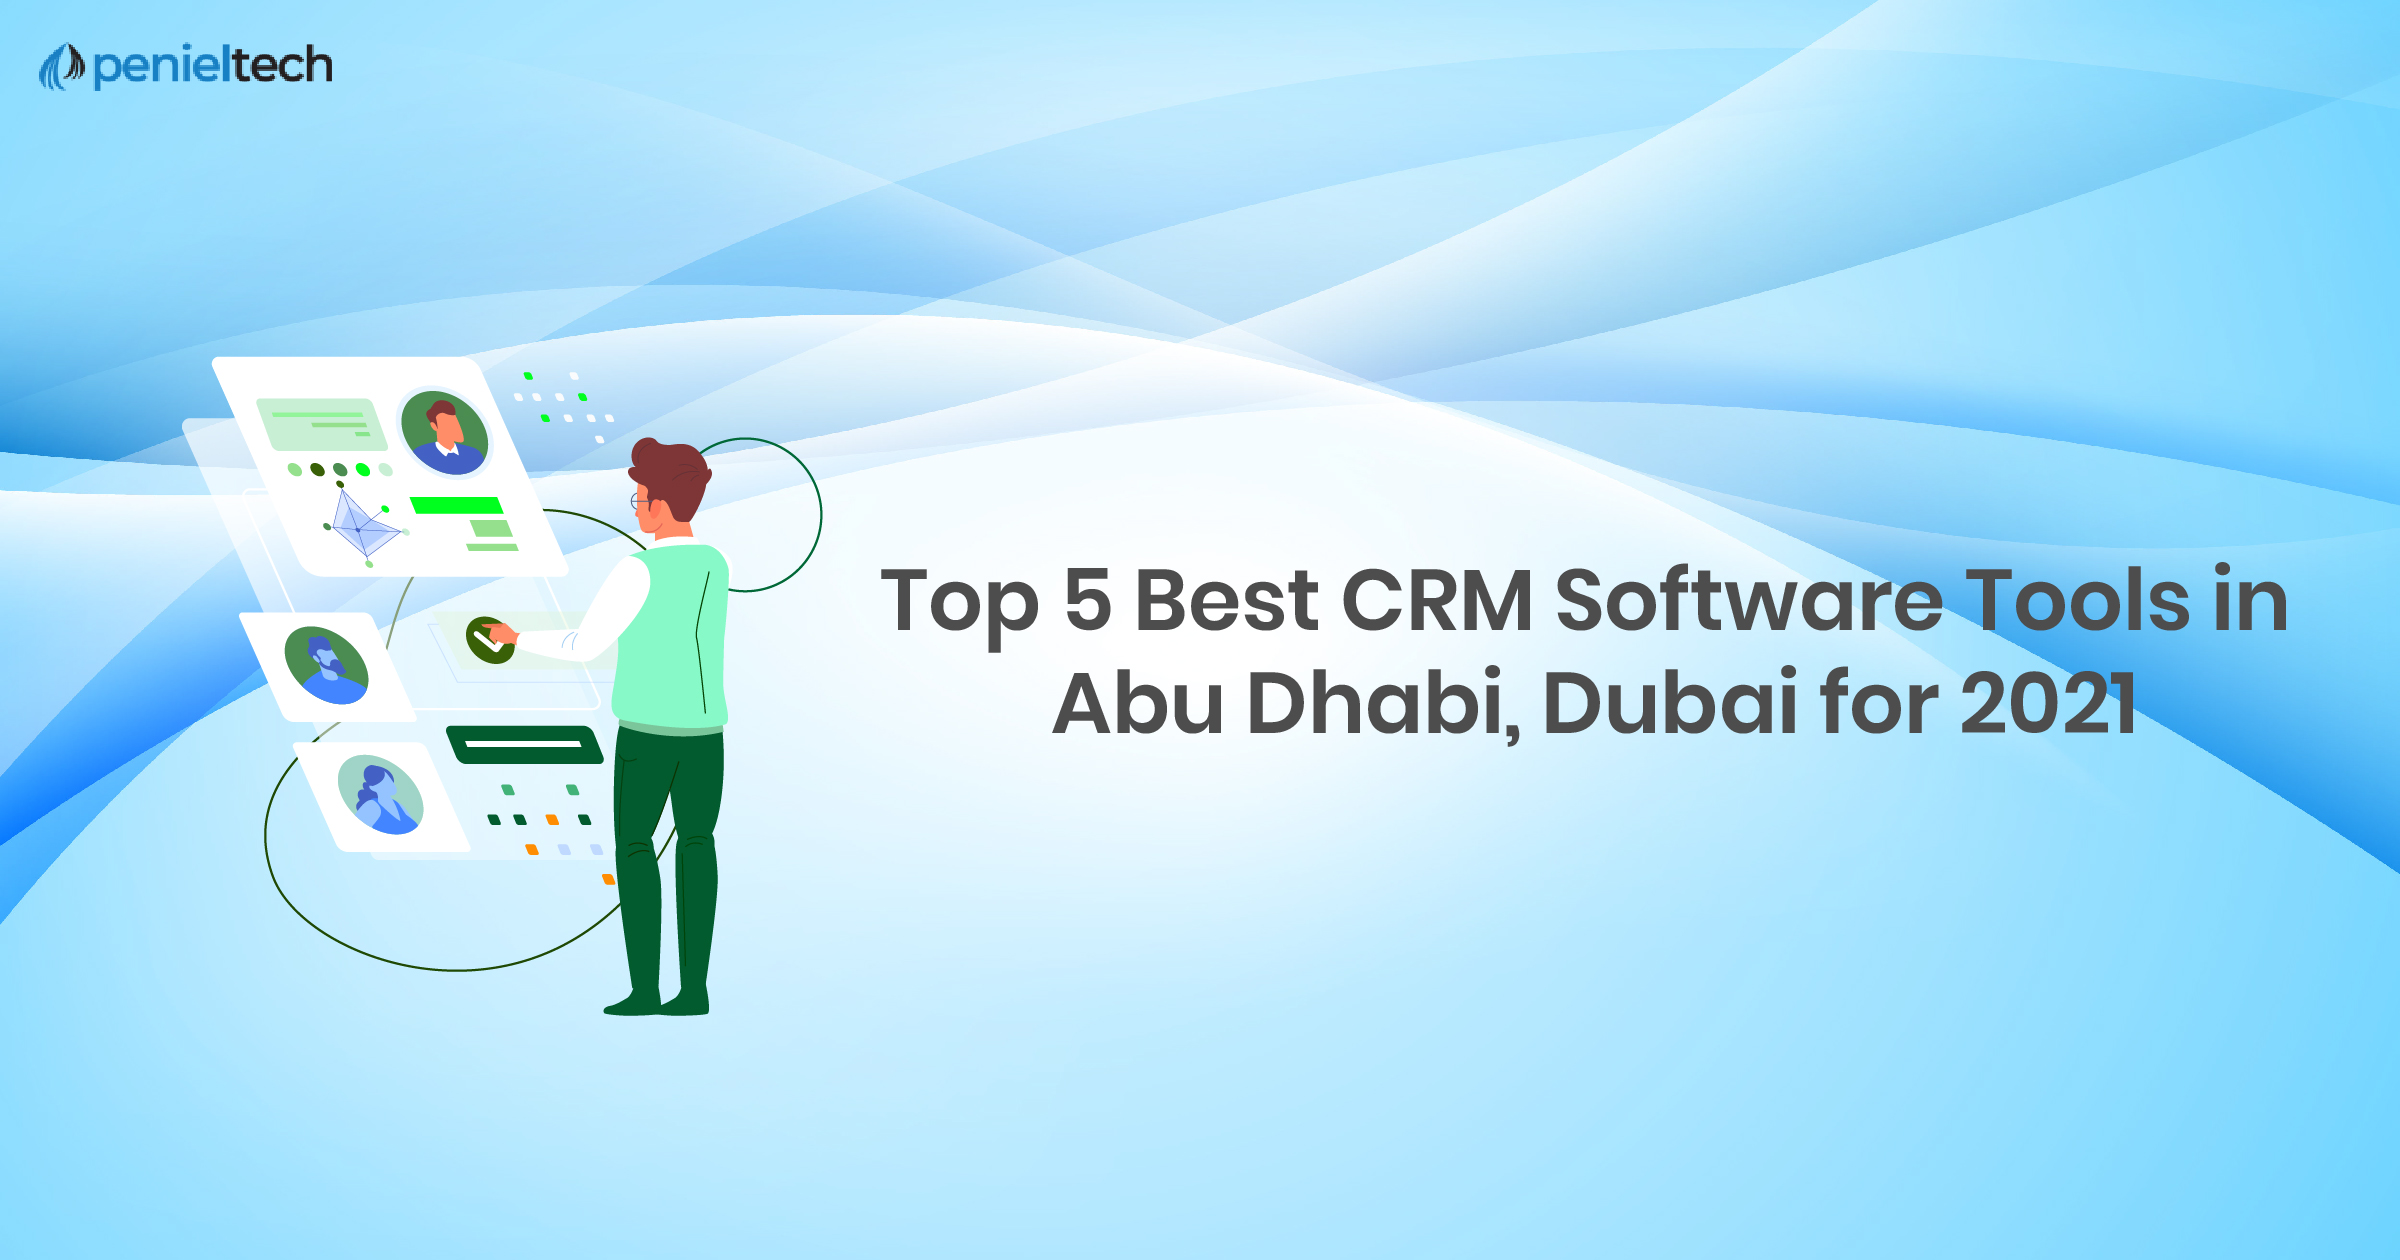 Top 5 Best CRM Software Tools in Abu Dhabi, Dubai for 2021